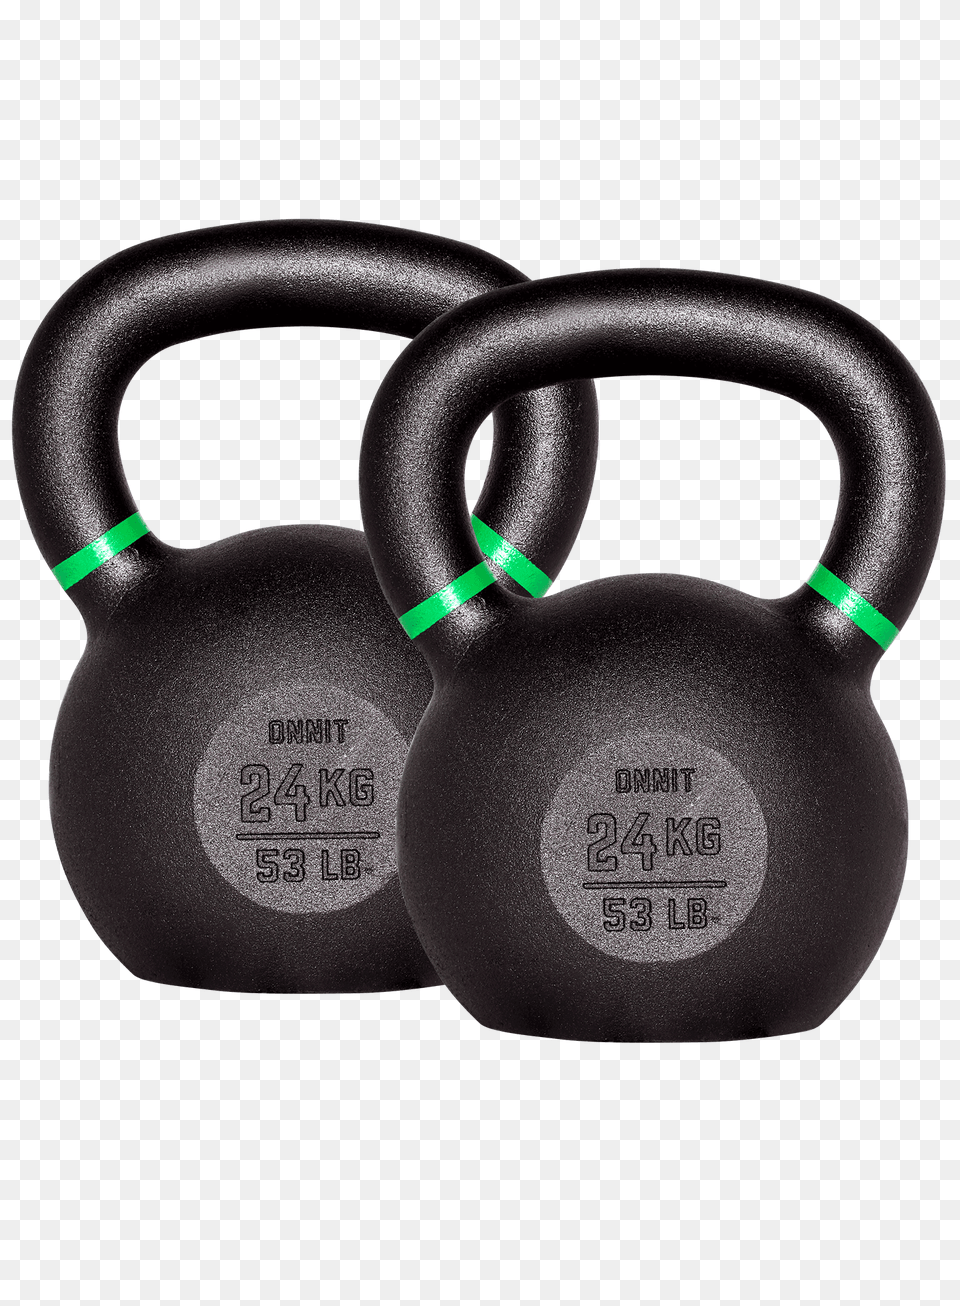 Onnit Double Kettlebells Onnit, Fitness, Gym, Gym Weights, Smoke Pipe Free Png Download